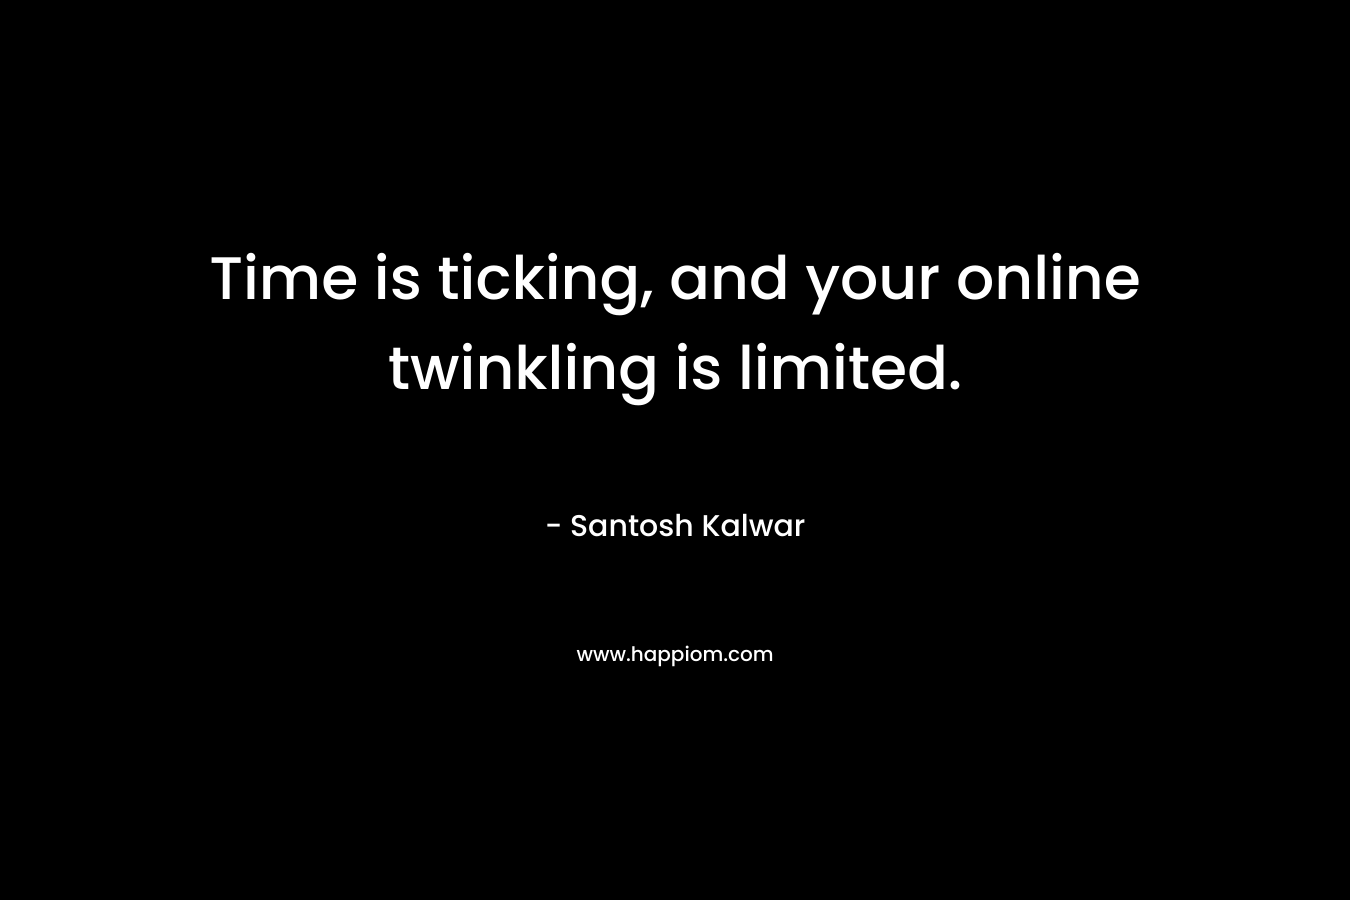 Time is ticking, and your online twinkling is limited. – Santosh Kalwar